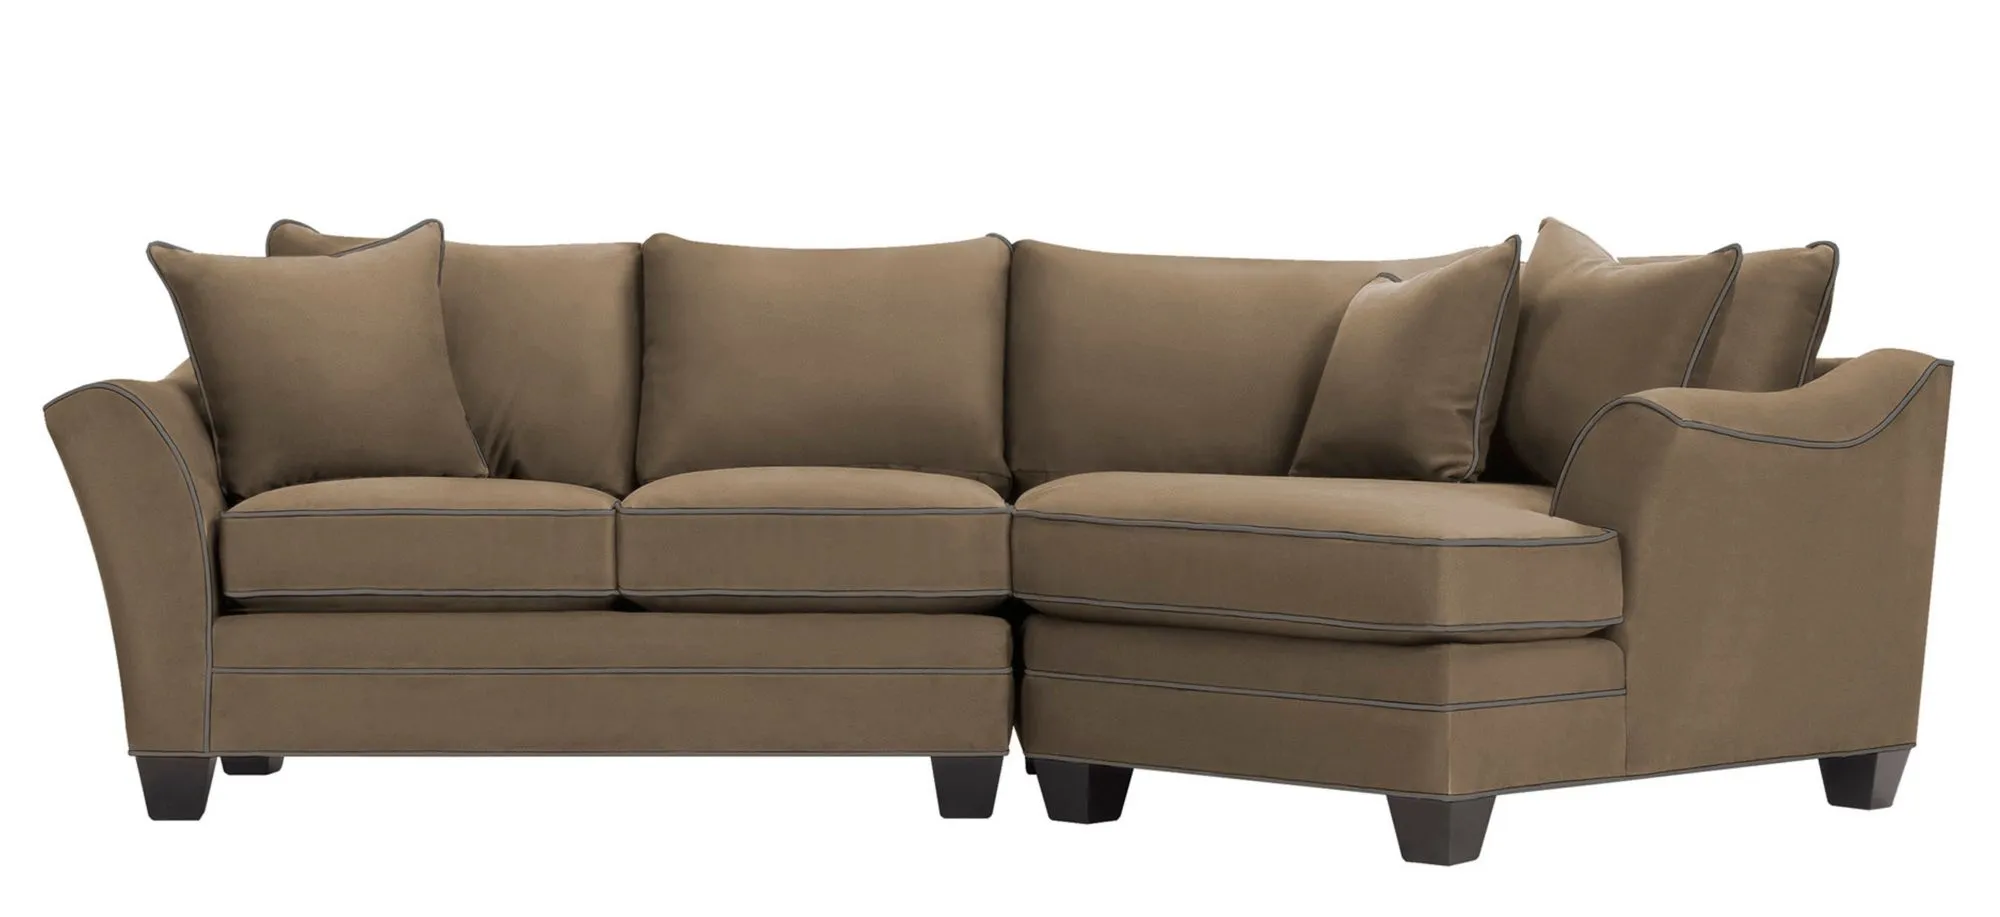 Foresthill 2-pc. Right Hand Cuddler Sectional Sofa in Suede So Soft Mineral/Slate by H.M. Richards